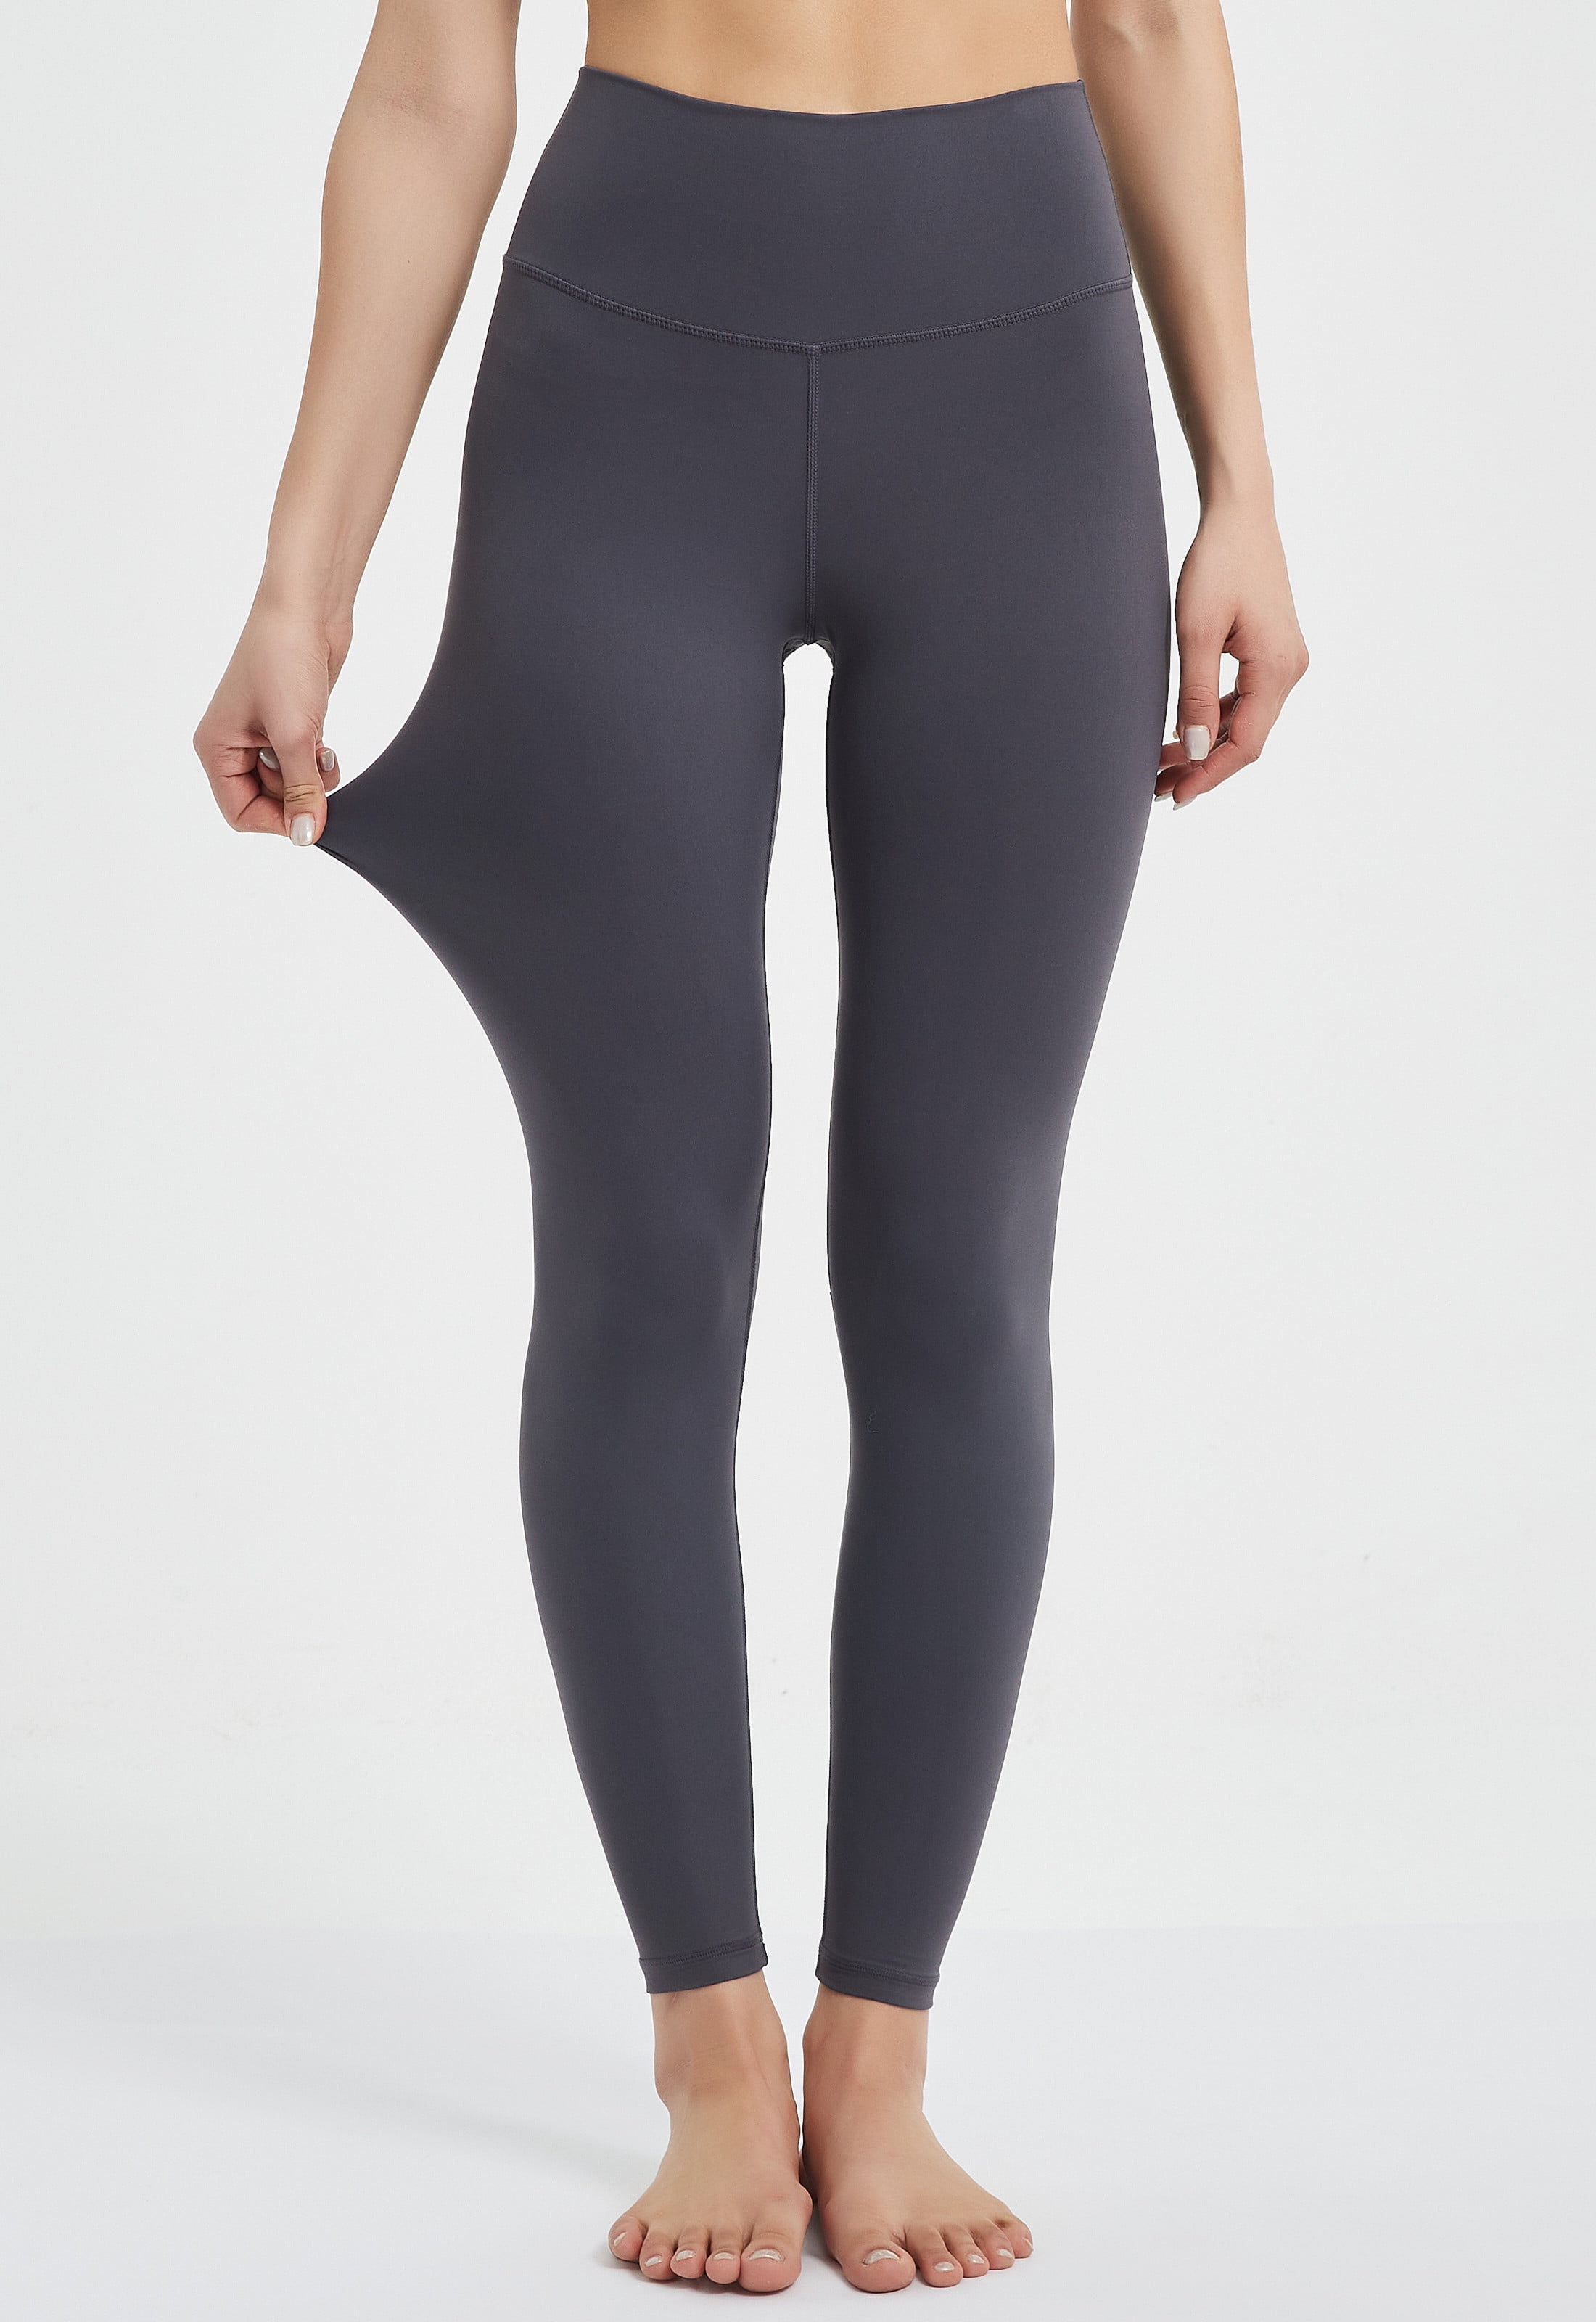  Lululemon Align II Stretchy Yoga Pants - High-Waisted Design,  25 Inch Inseam, Black, Size 6 : Sports & Outdoors